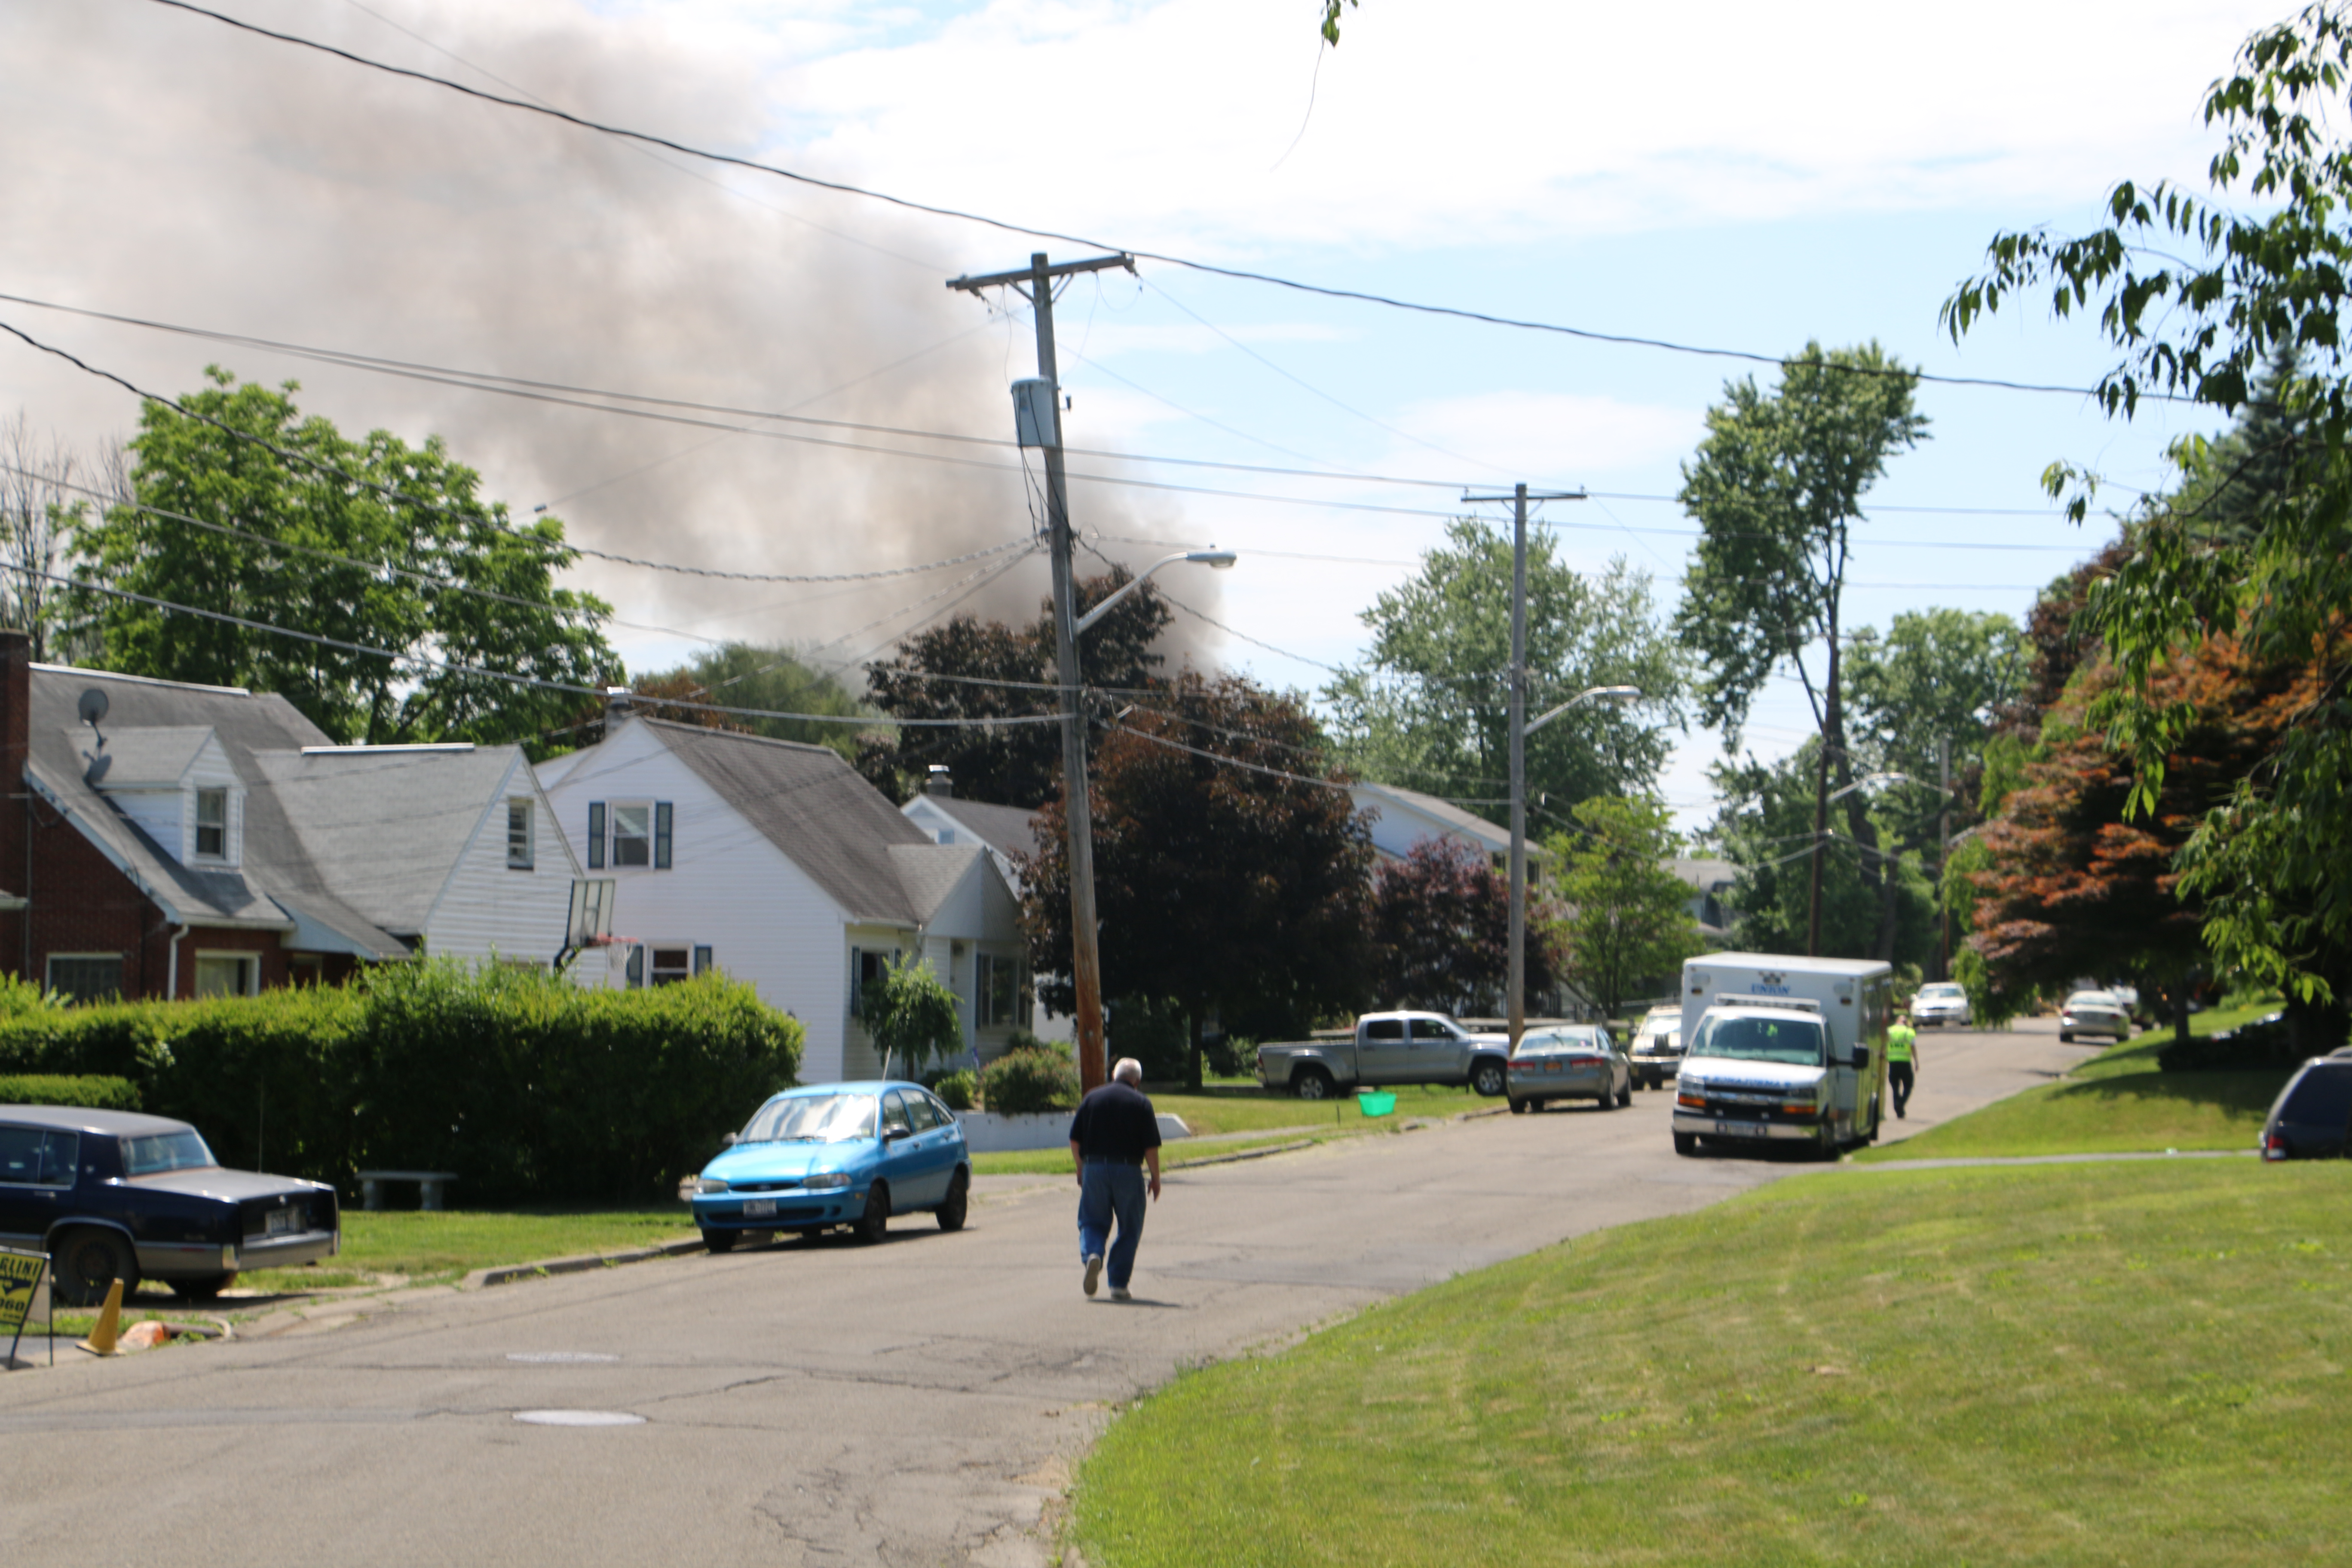 06-18-14  Response - Fire - Hoover Ave